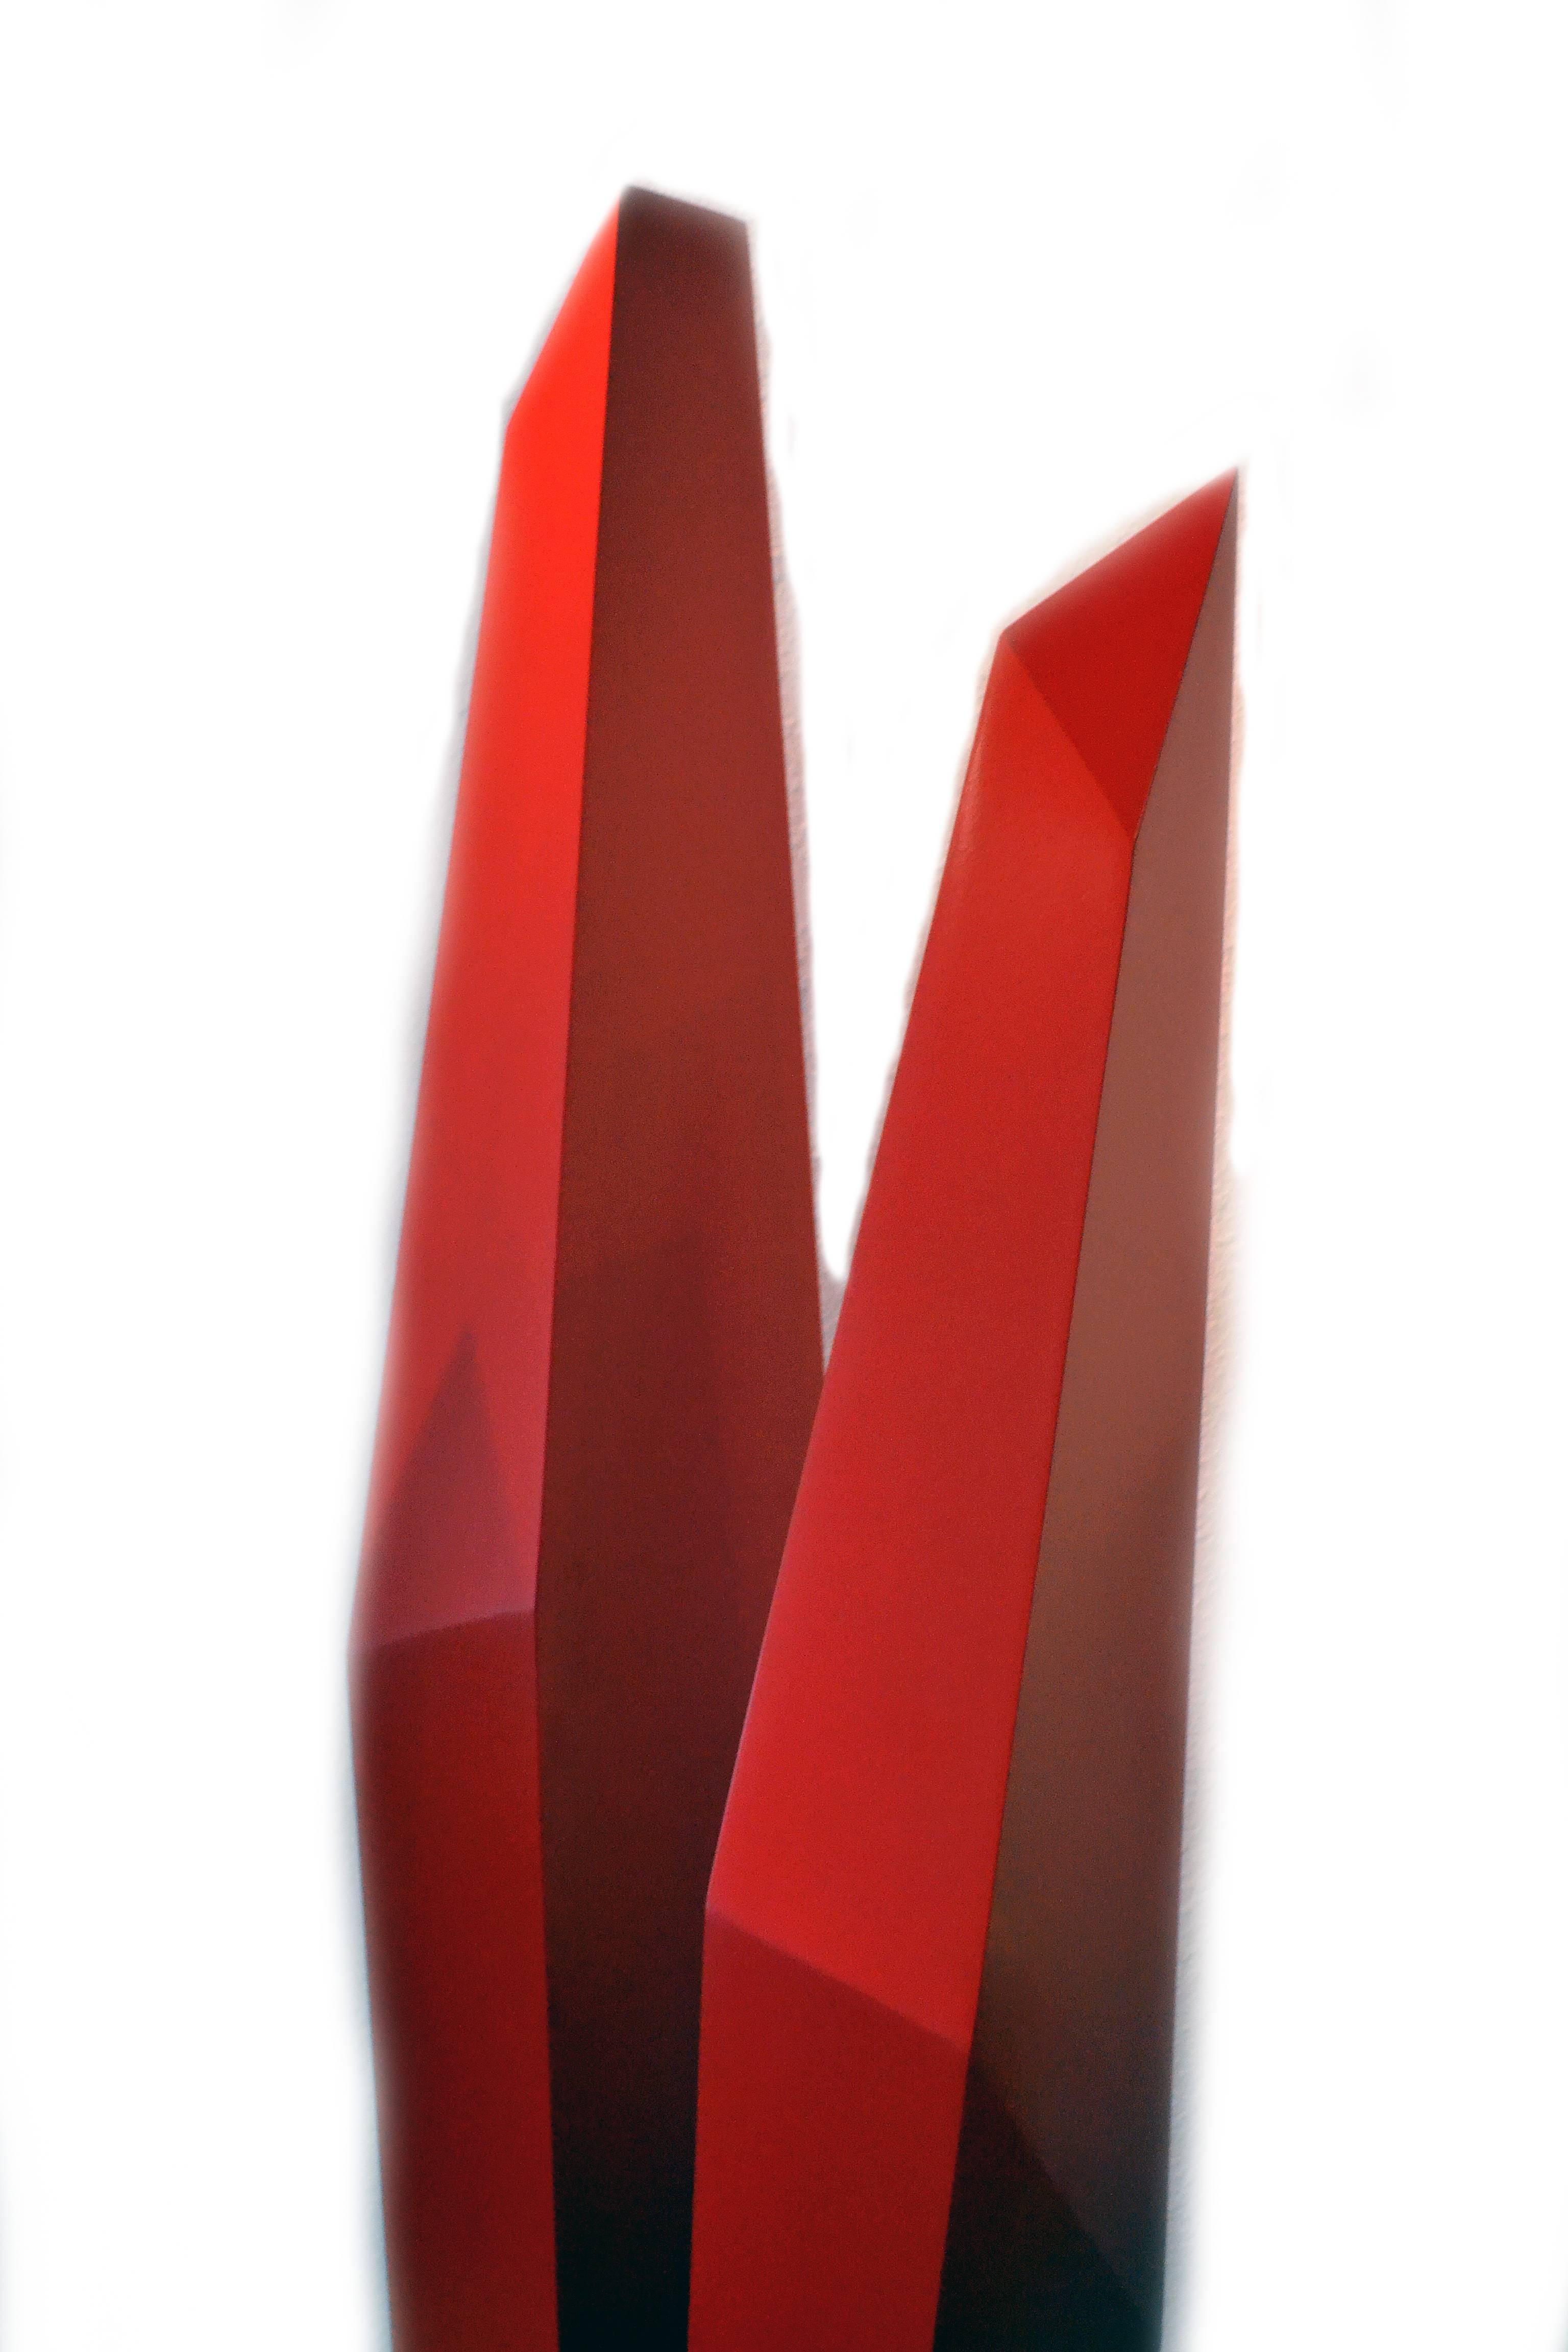 American Abstract Aluminium Sculpture by Robert Marion For Sale